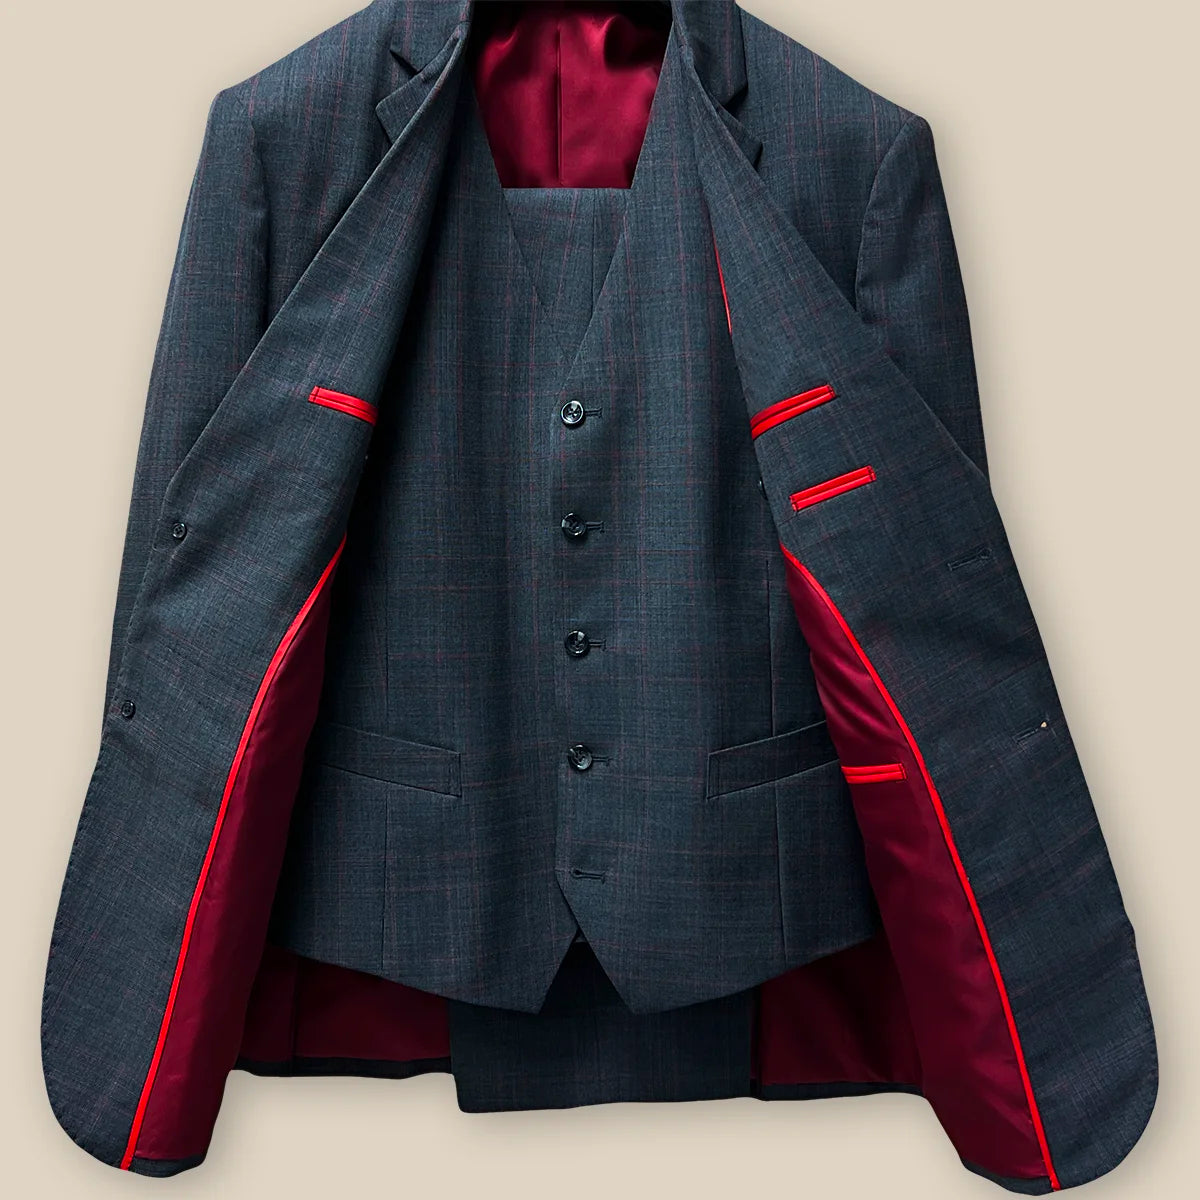 Jacket, pants, and vest 3pc three piece full view revealing a complete ensemble in charcoal grey prince of wales plaid with maroon windowpane.